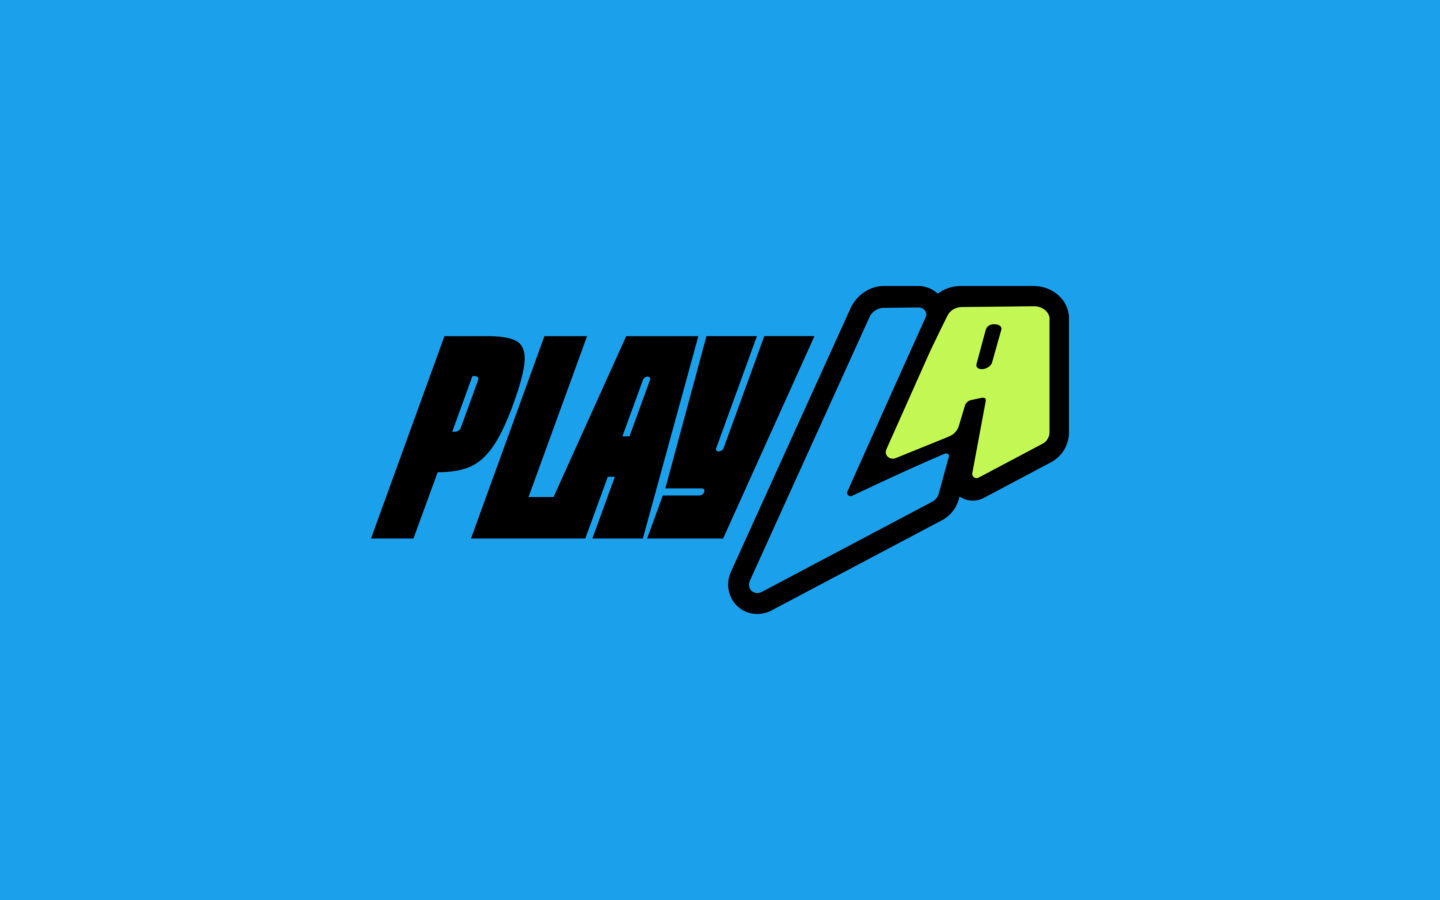 A logo for the PlayLA which is a radically inclusive athletic movement for healthier Los Angeles with vibrant colors on a blue background